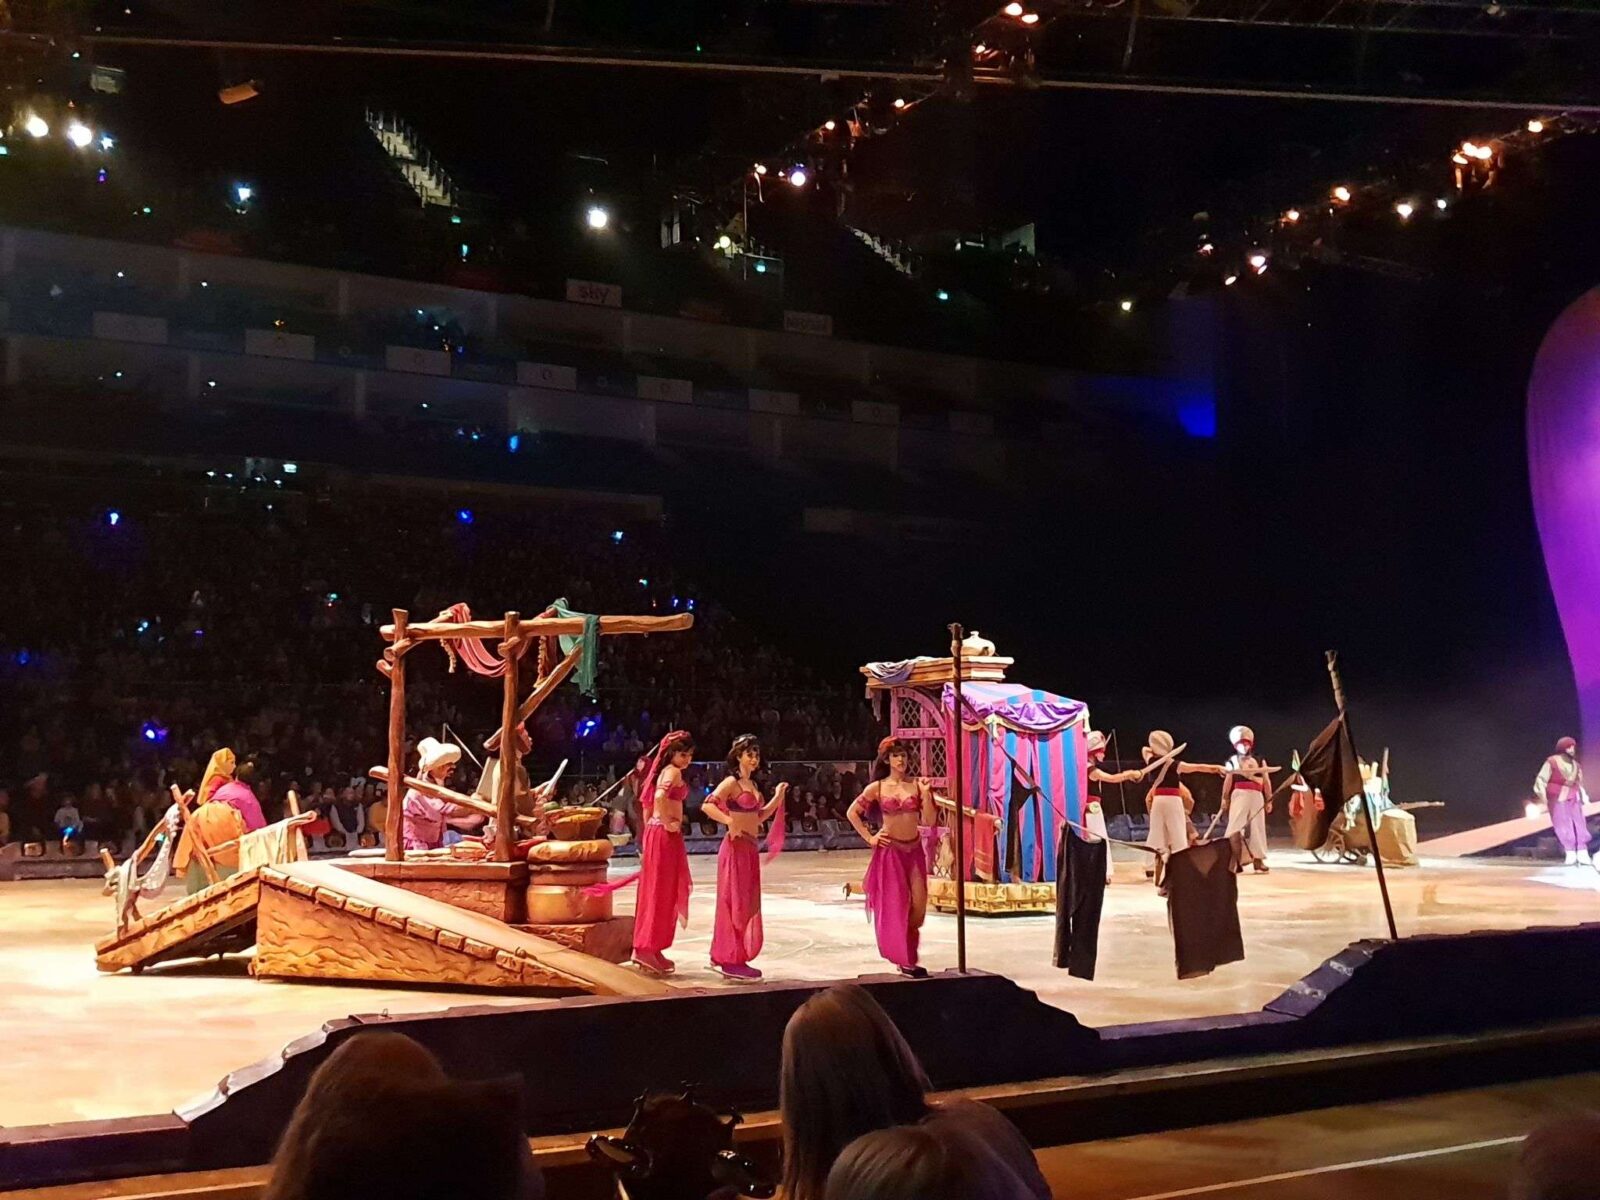 Magical Disney On Ice at 02 Arena